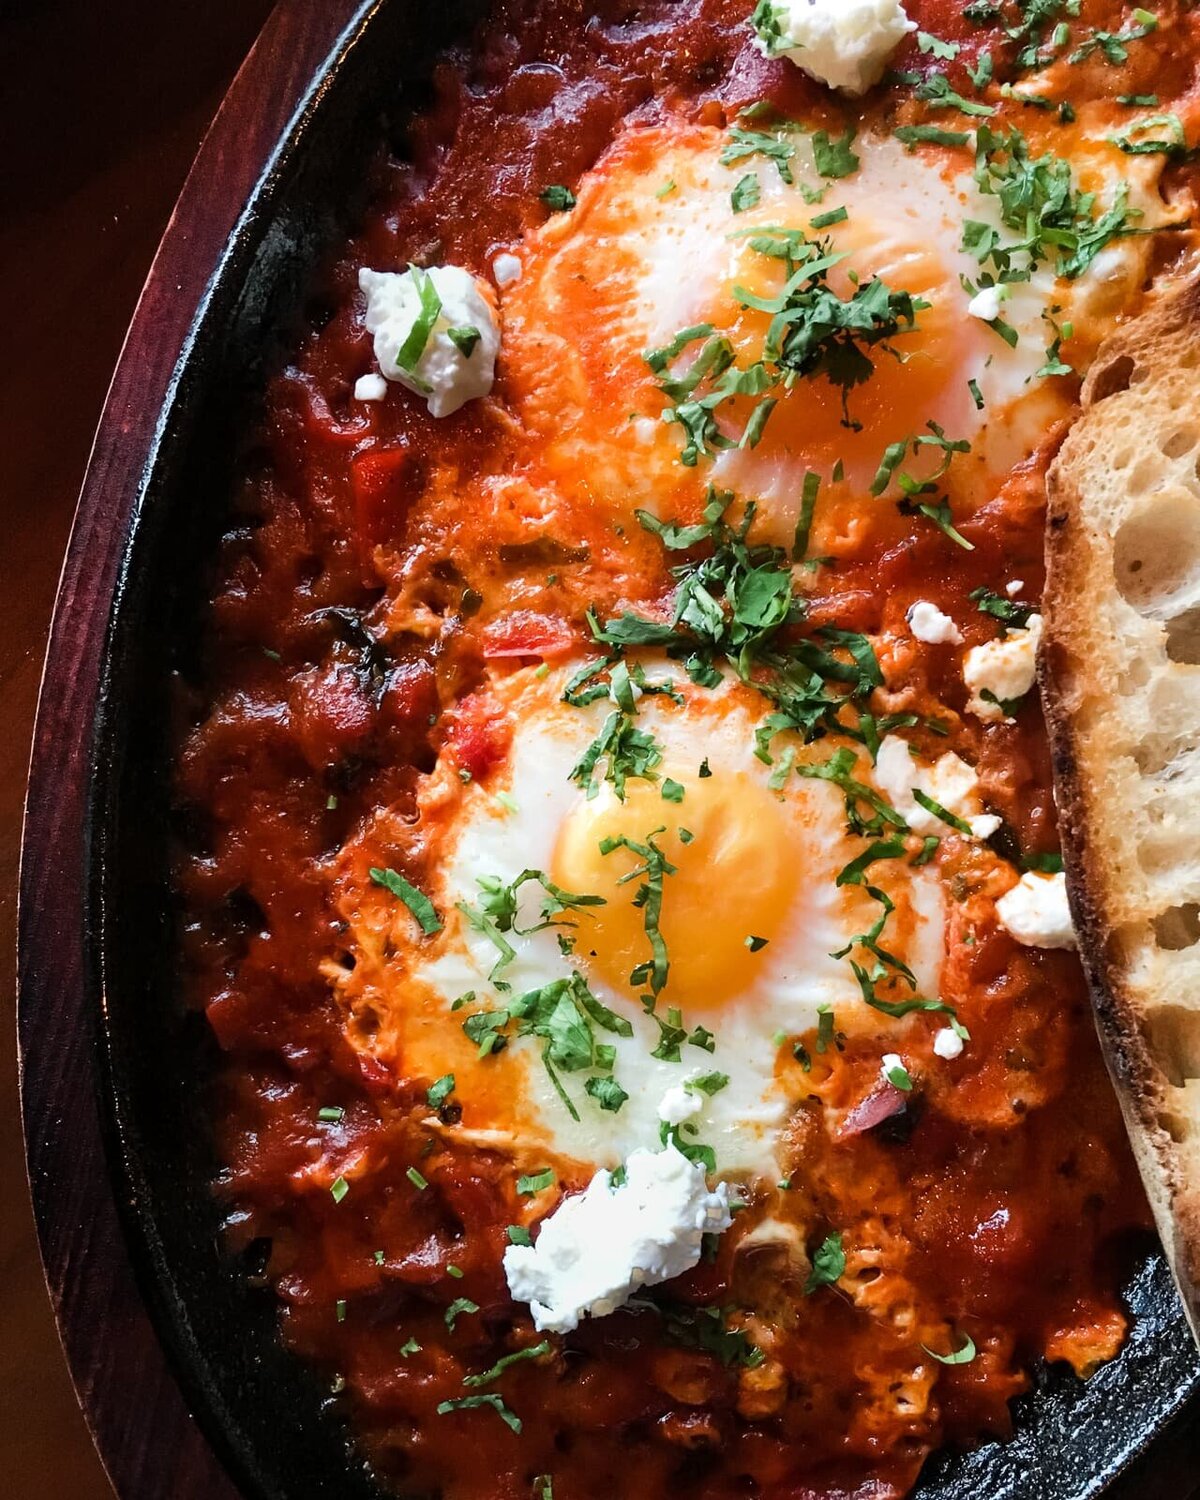 03.-Shakshuka-Eggs-in-a-Spiced-Sauce-with-Feta-and-Toast-Stomping-Grounds